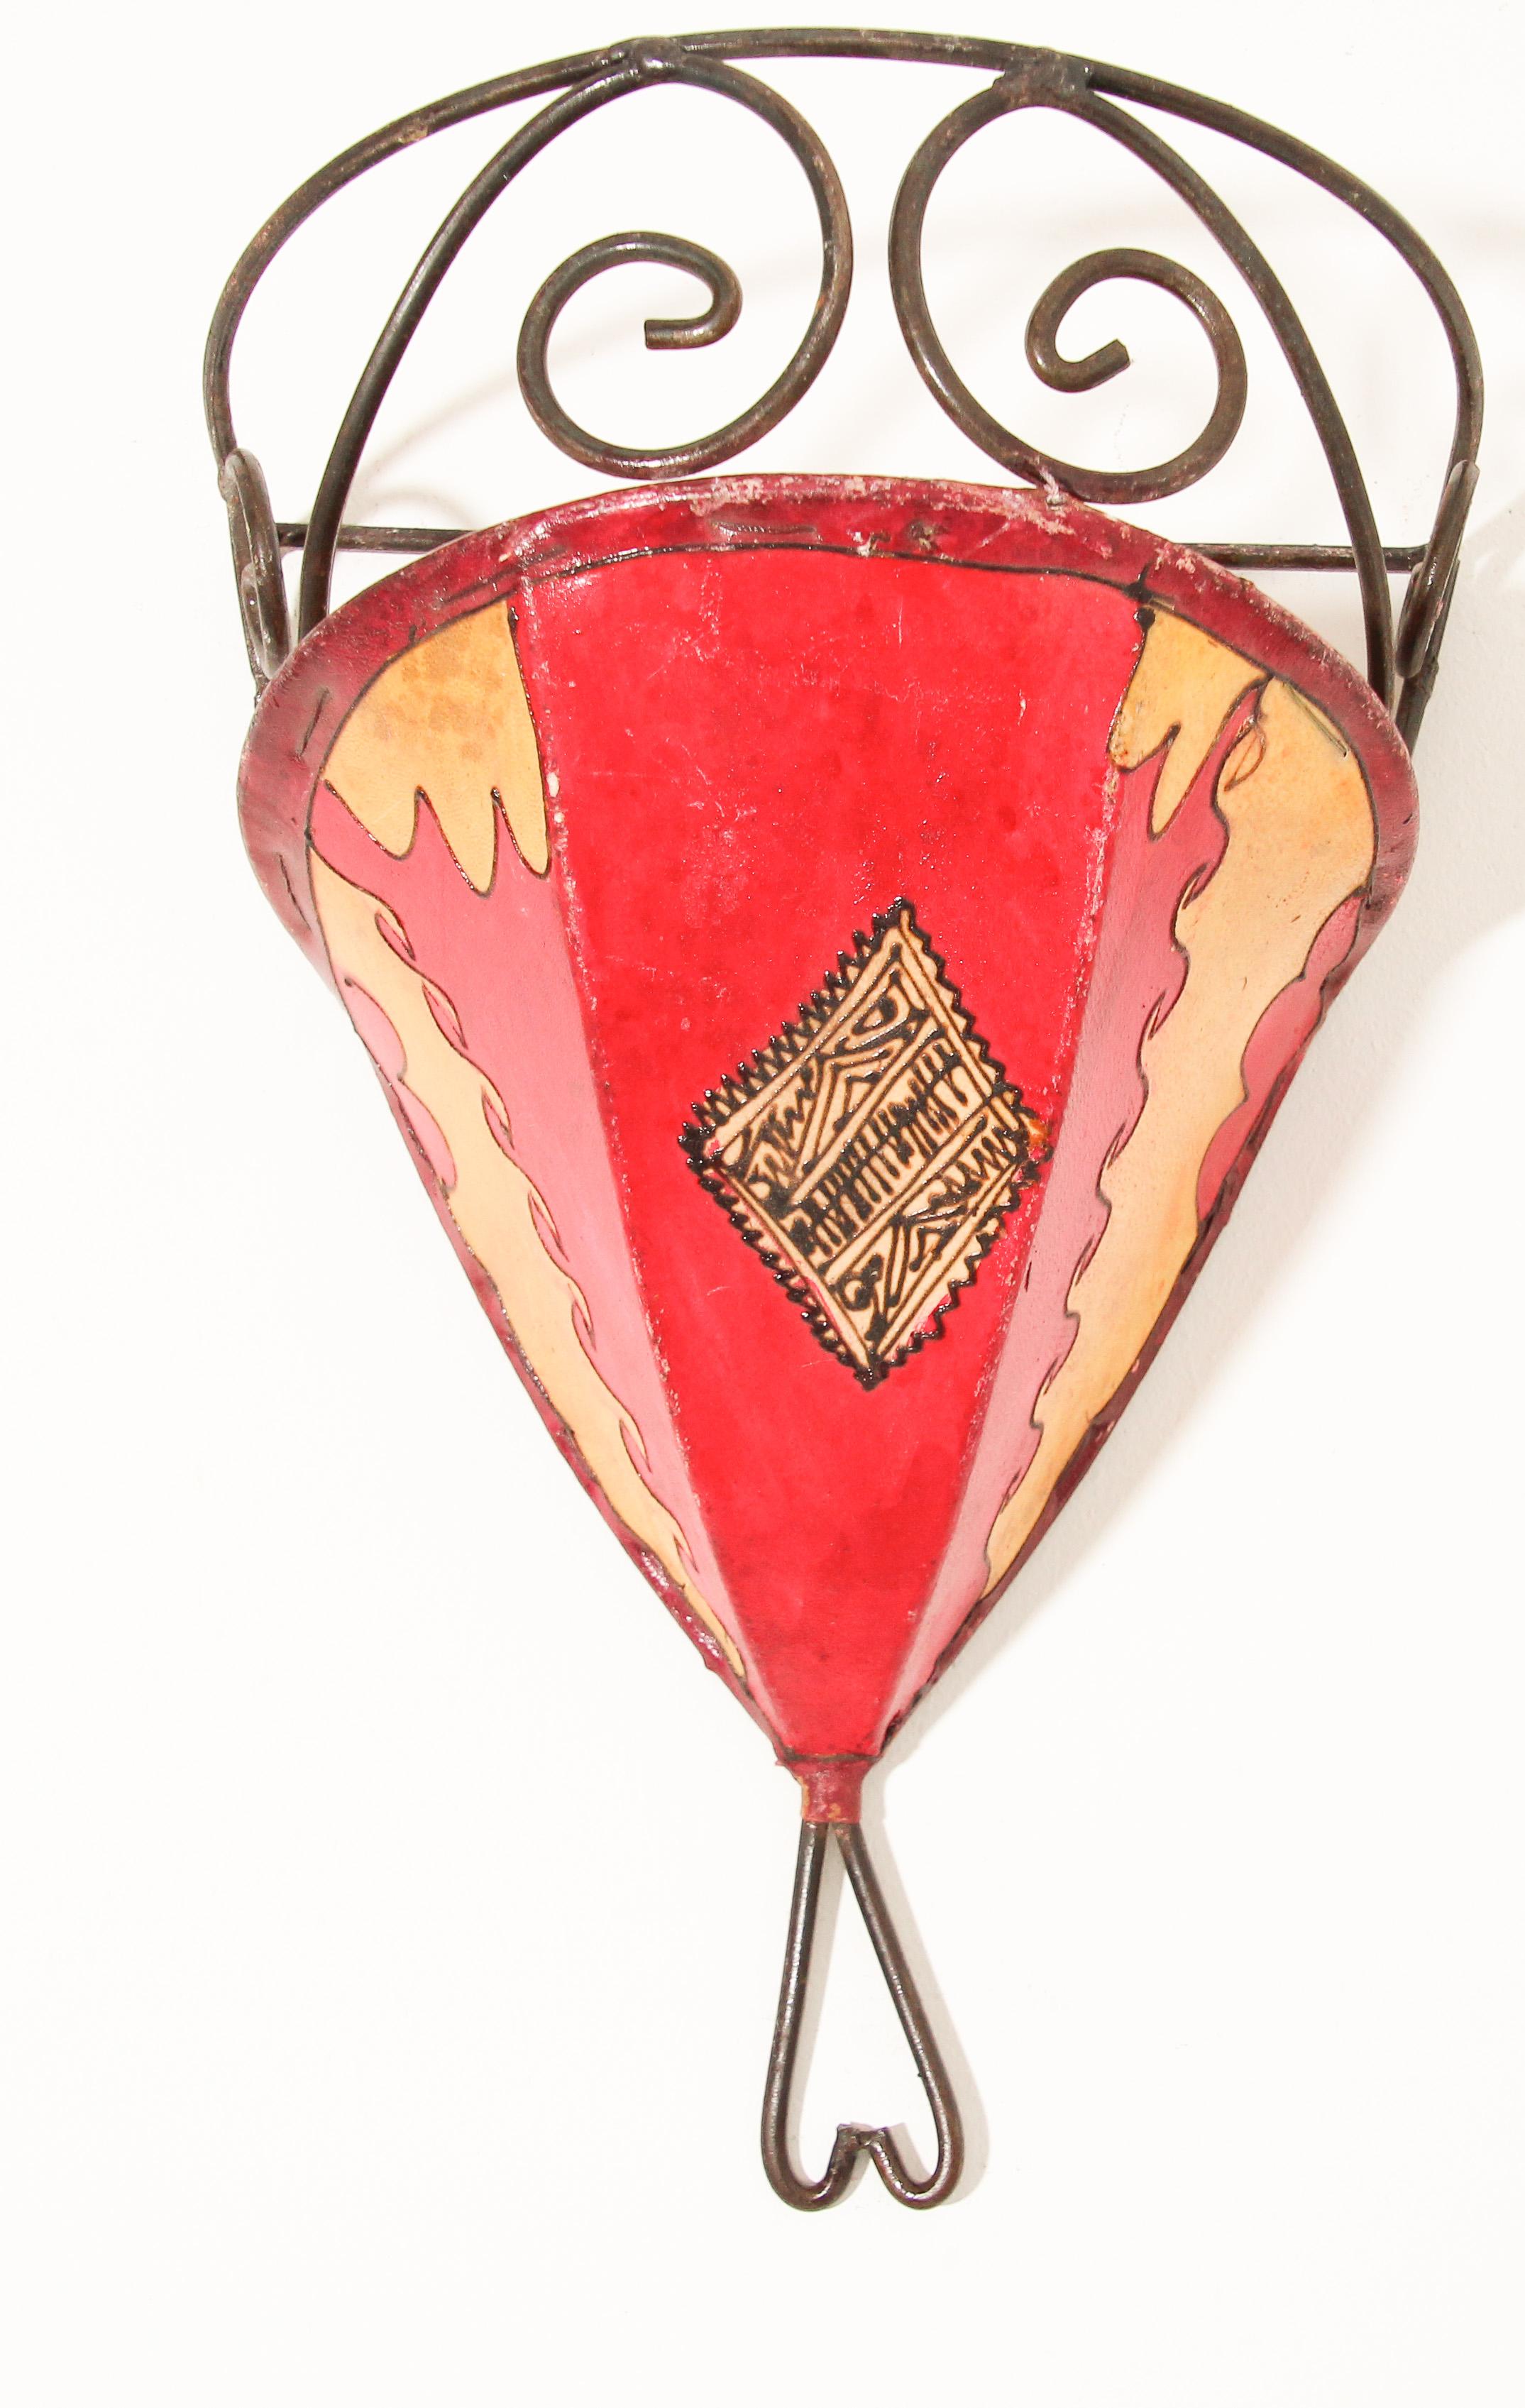 African tribal art parchment wall shade sconce featuring a large curved hide form stitched on iron and hand painted surface.
These Moroccan art pieces could be used as wall lamp shade.
Iron frame covered with hide parchment which has been hand